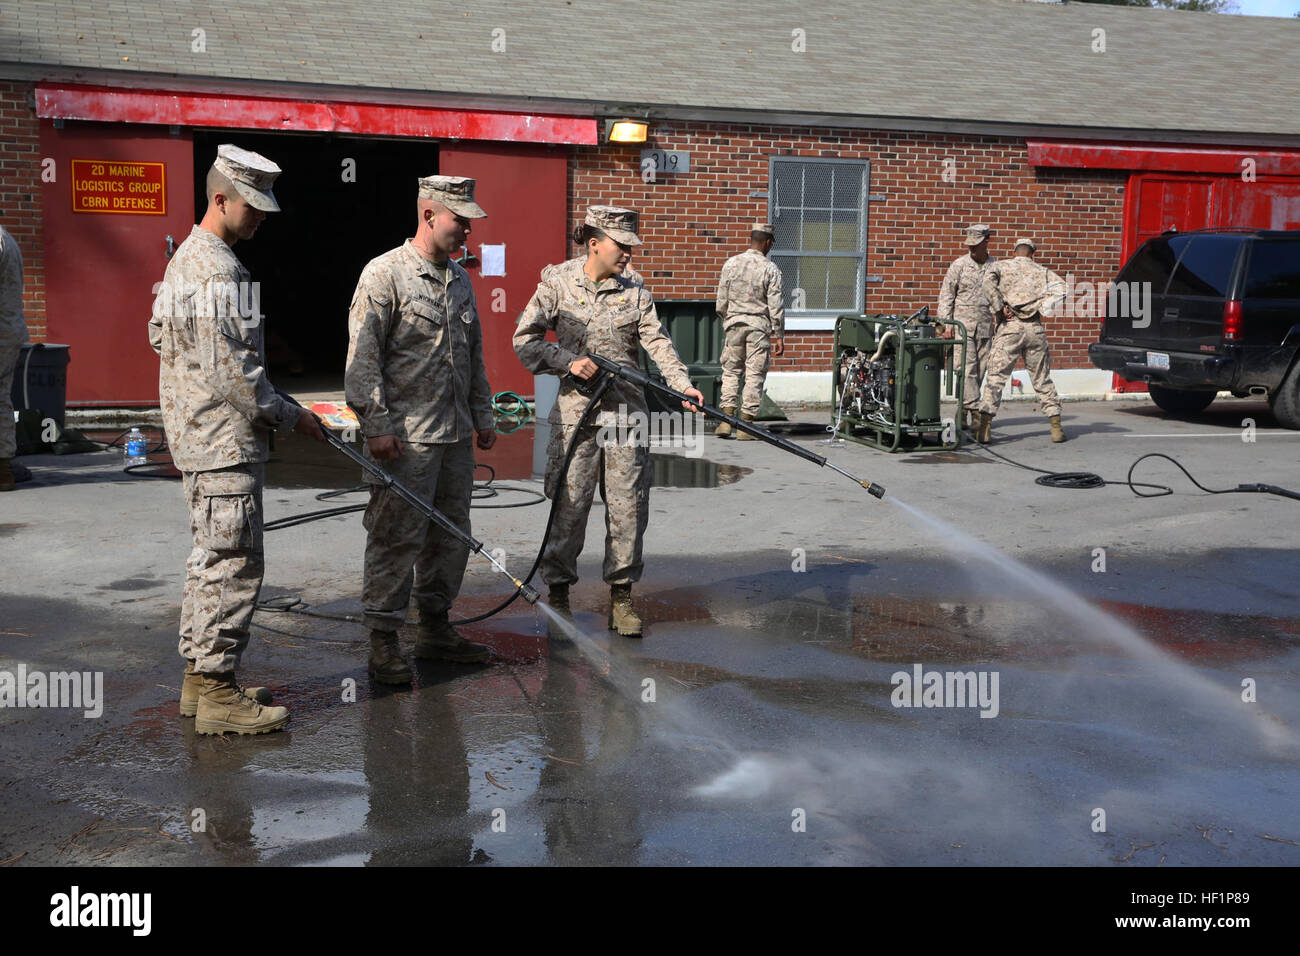 Pfc. Taren C. Seidel (left) a water support technician with 8th Engineer Support Battalion, 2nd Marine Logistics Group, and Lance Cpl. Michelle E. Rusz (right), an administration specialist with Combat Logistics Regiment 27, 2nd MLG, demonstrate the spray capabilities of the M26 Joint Service Transportable Decontamination System during a chemical, biological, radiological and nuclear decontamination course aboard Camp Lejeune, N.C., Oct. 23, 2013. The M26 was designed to be lightweight and have the ability to decontaminate personnel, equipment and vehicles from CBRN agents. License to clean, M Stock Photo